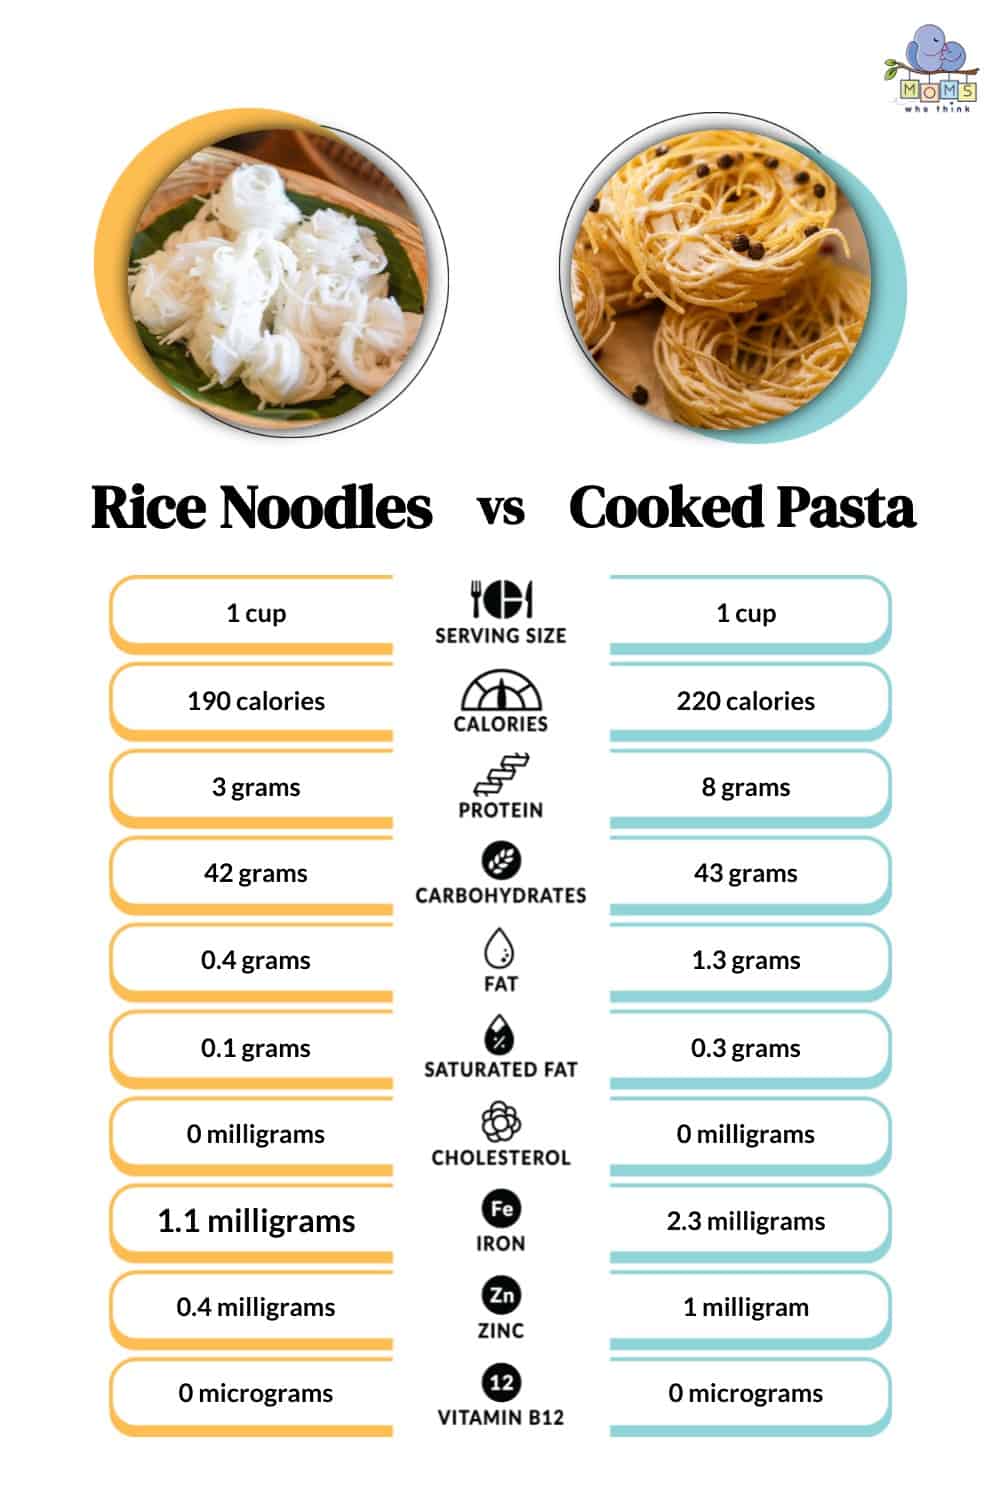 Rice Noodles vs Cooked Pasta Nutrition